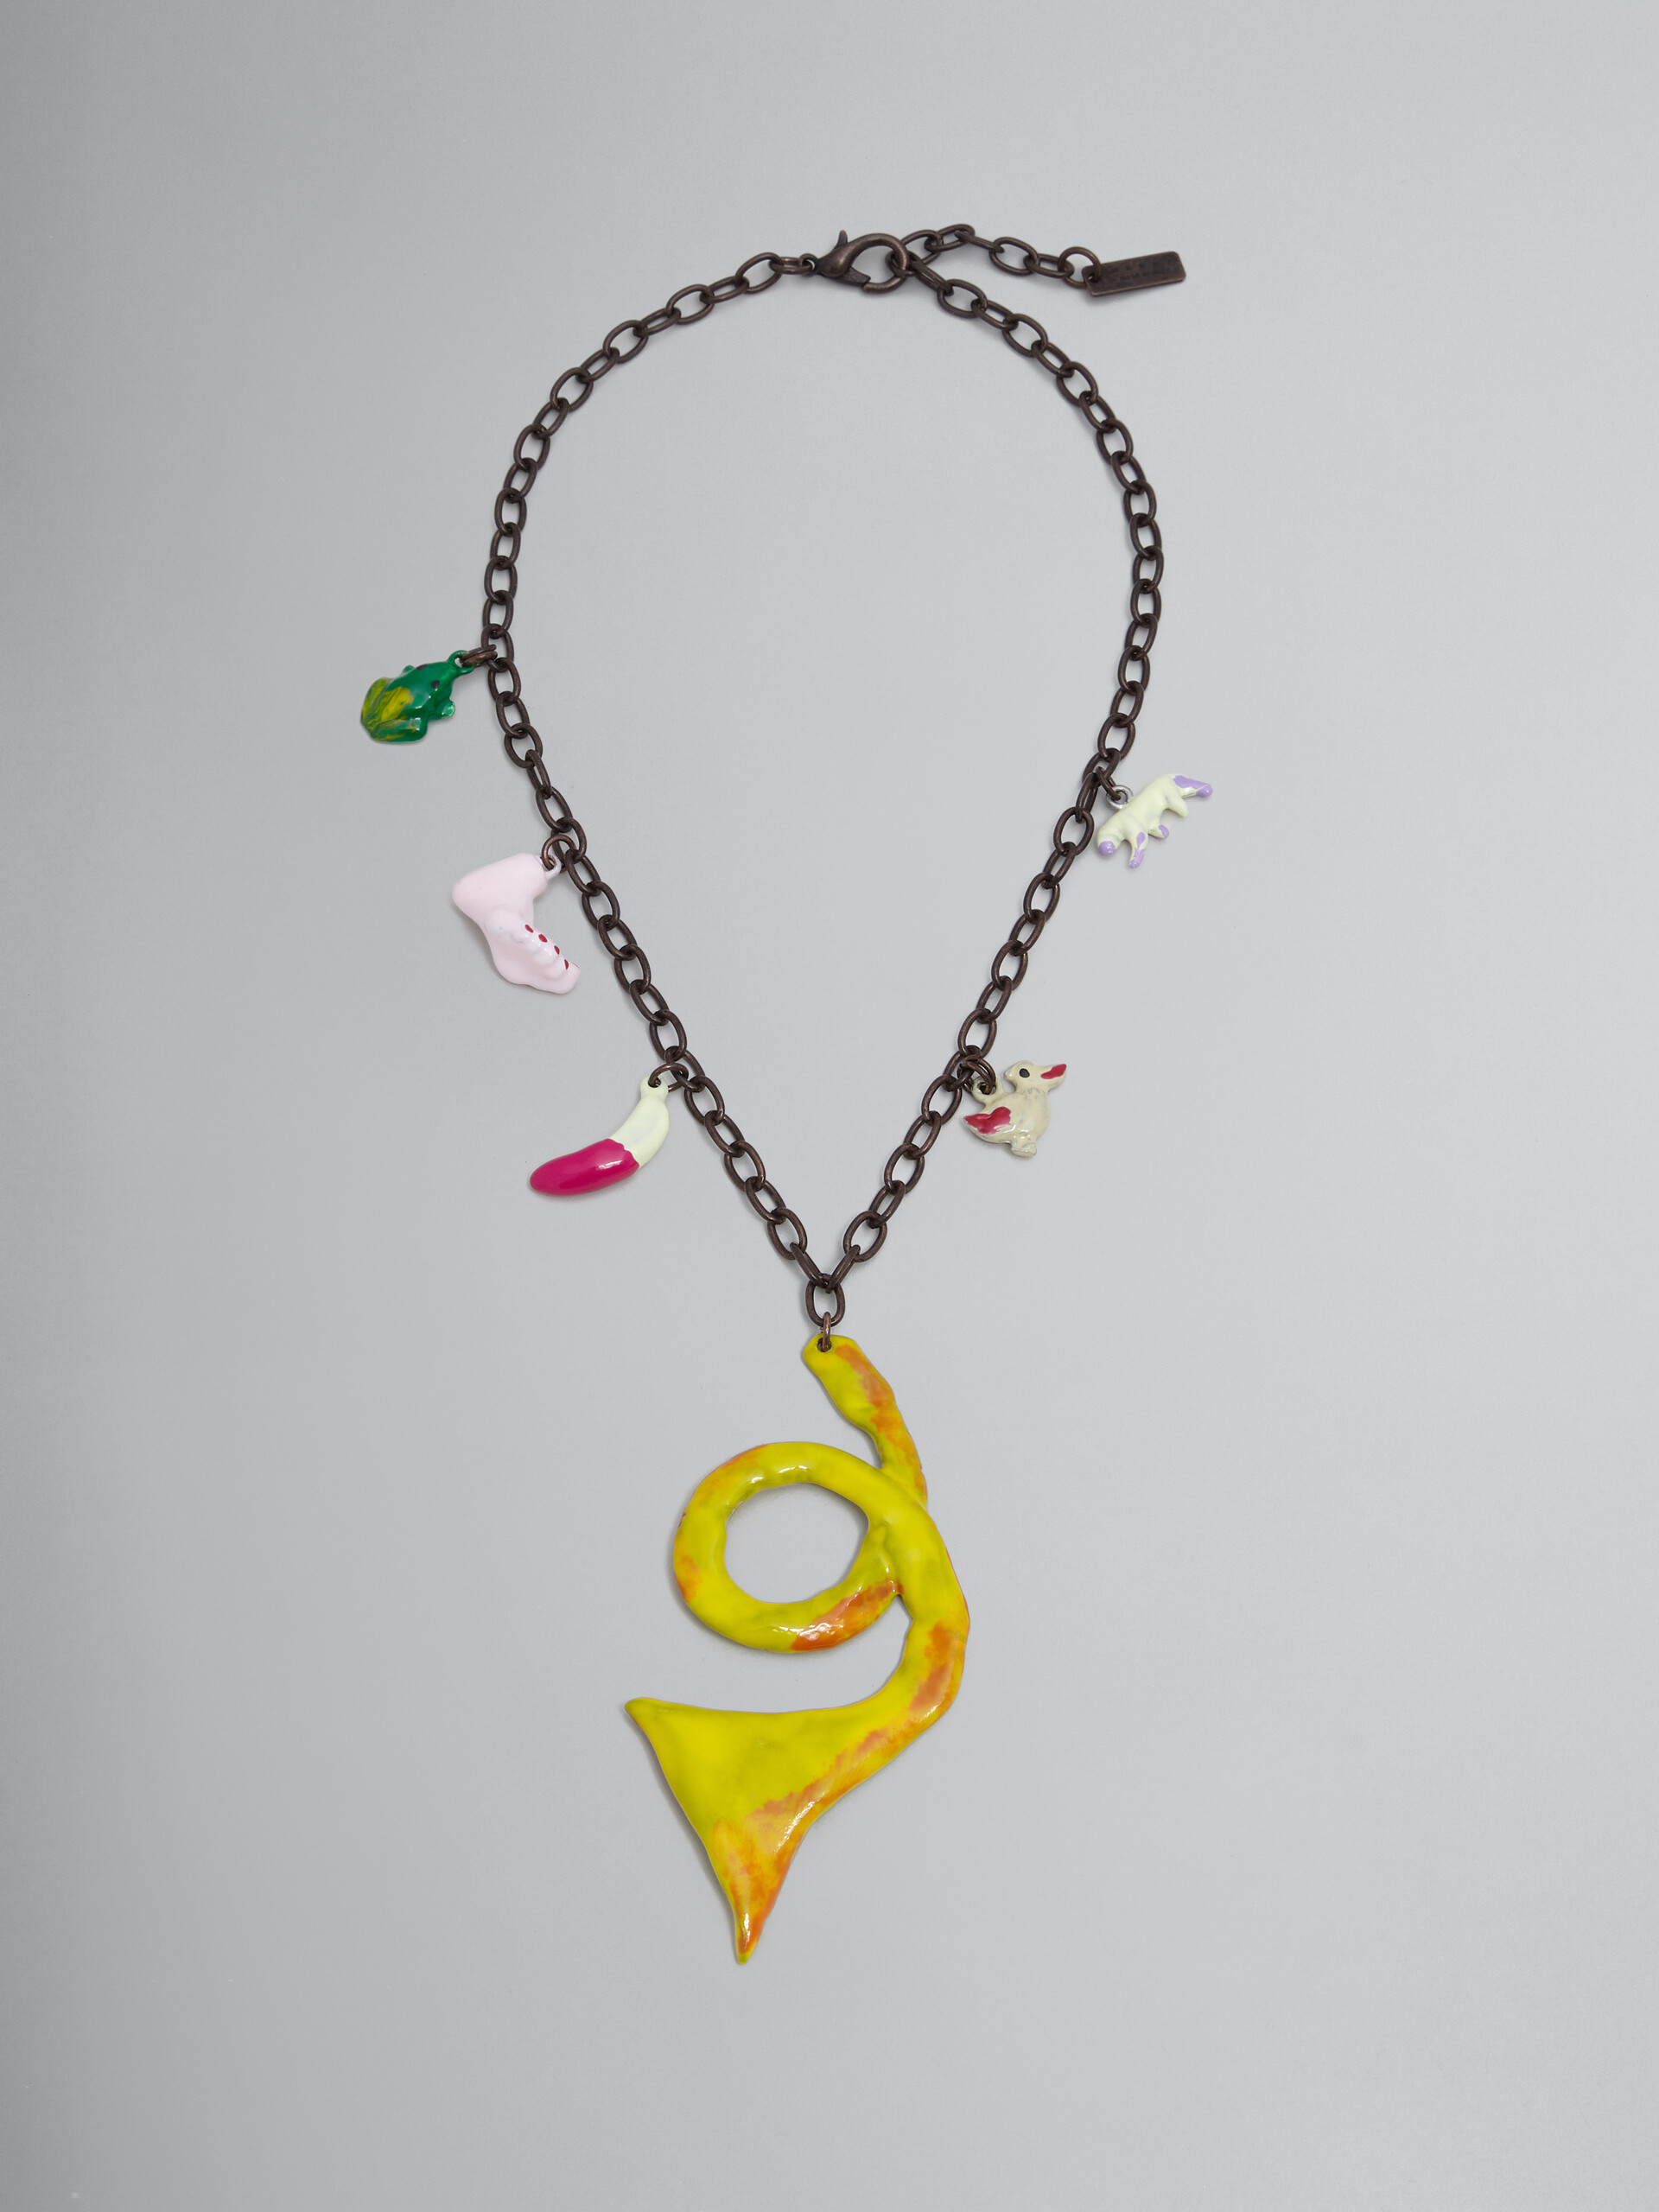 Marni x No Vacancy Inn - Necklace with green pink and yellow pendants - Necklaces - Image 1